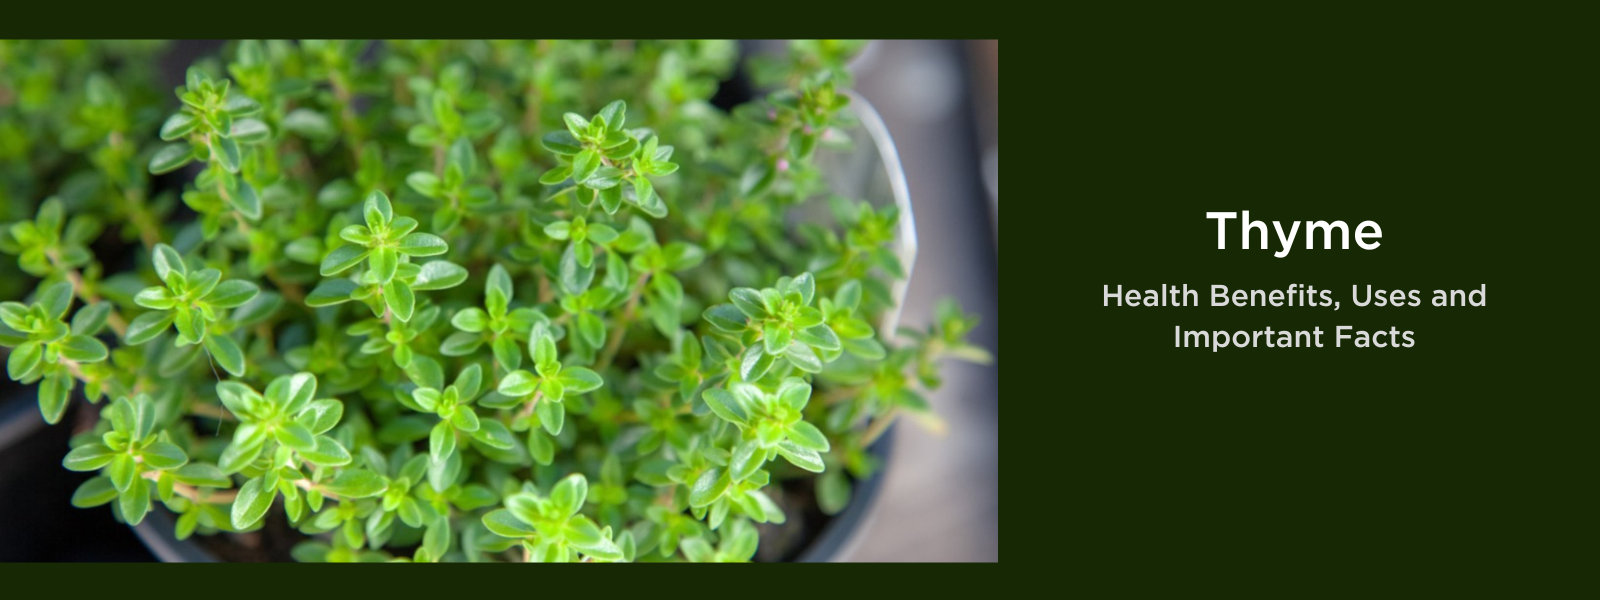 Thyme - Health Benefits, Uses and Important Facts